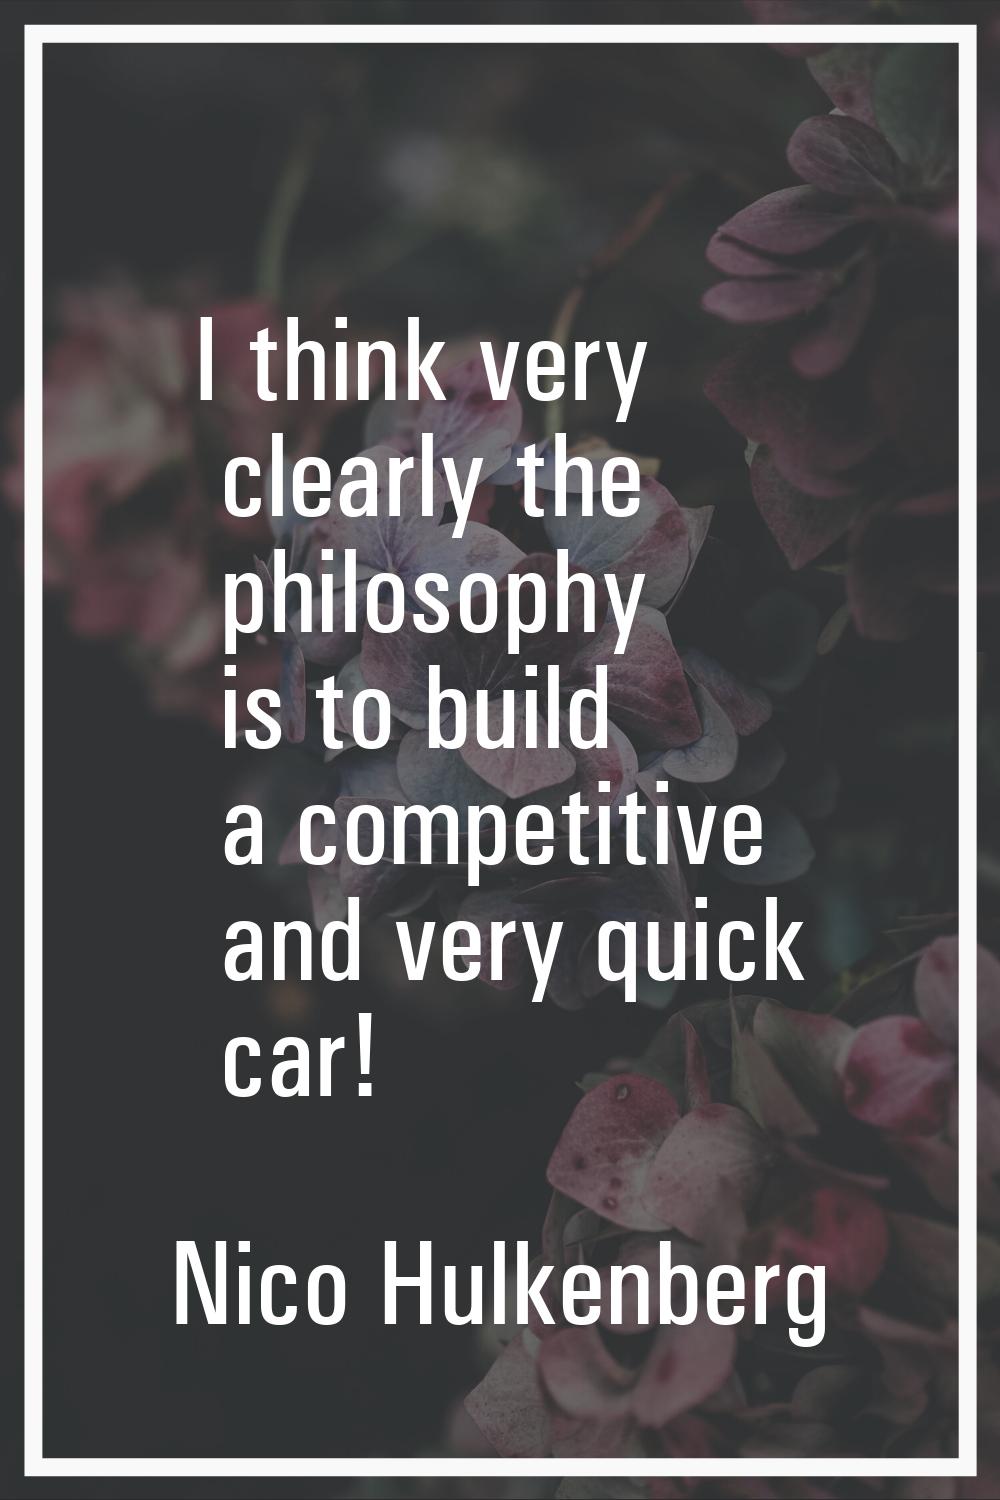 I think very clearly the philosophy is to build a competitive and very quick car!